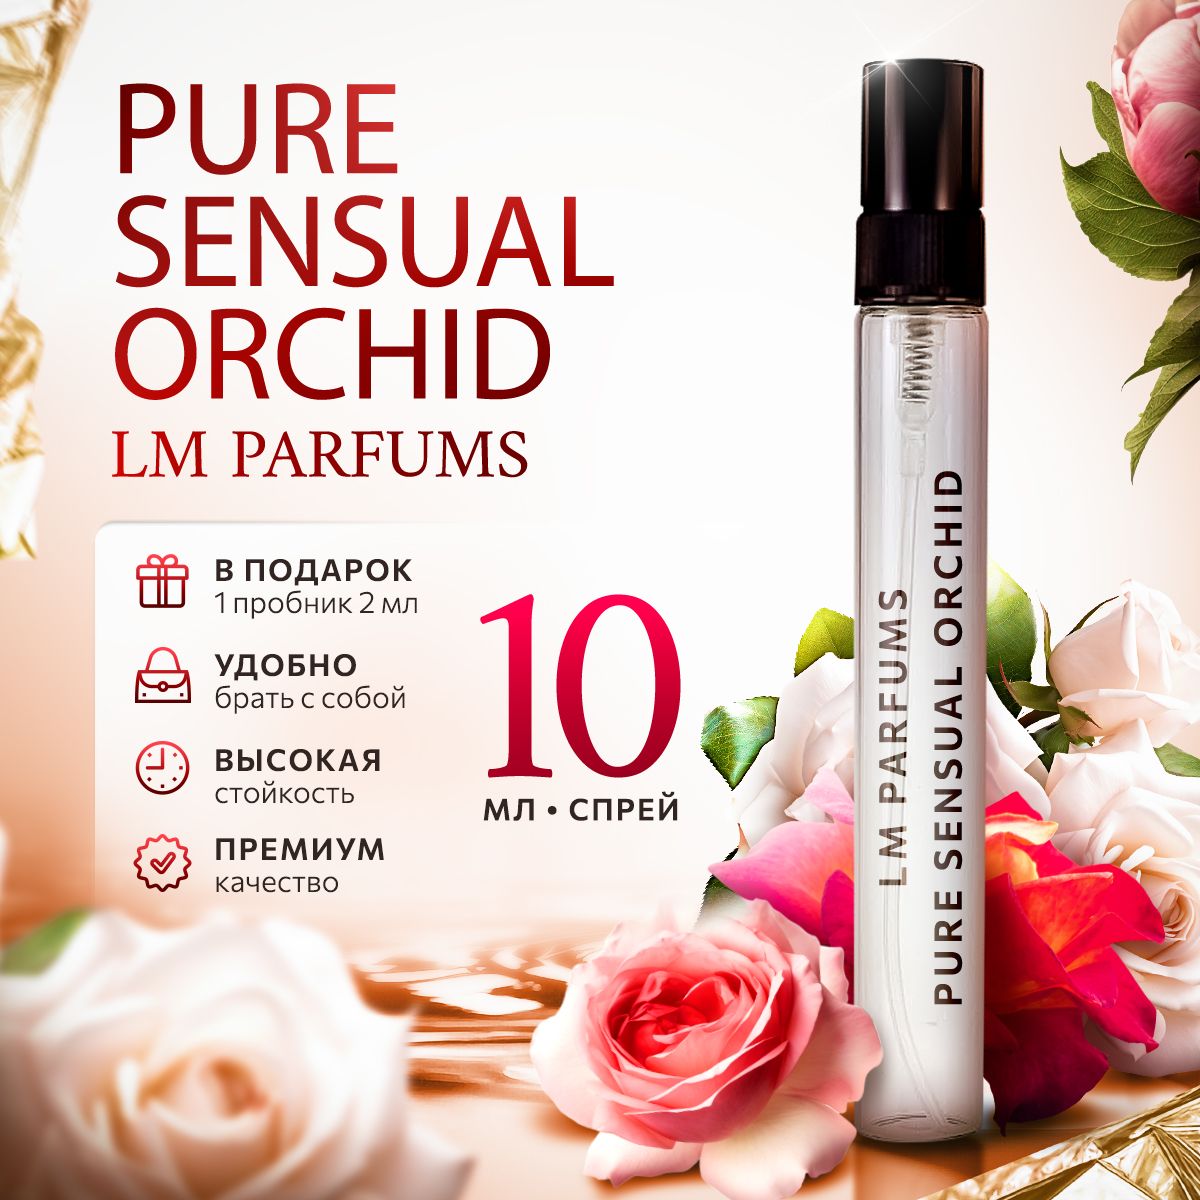 Sensual orchid lm. LM Parfums sensual Orchid.